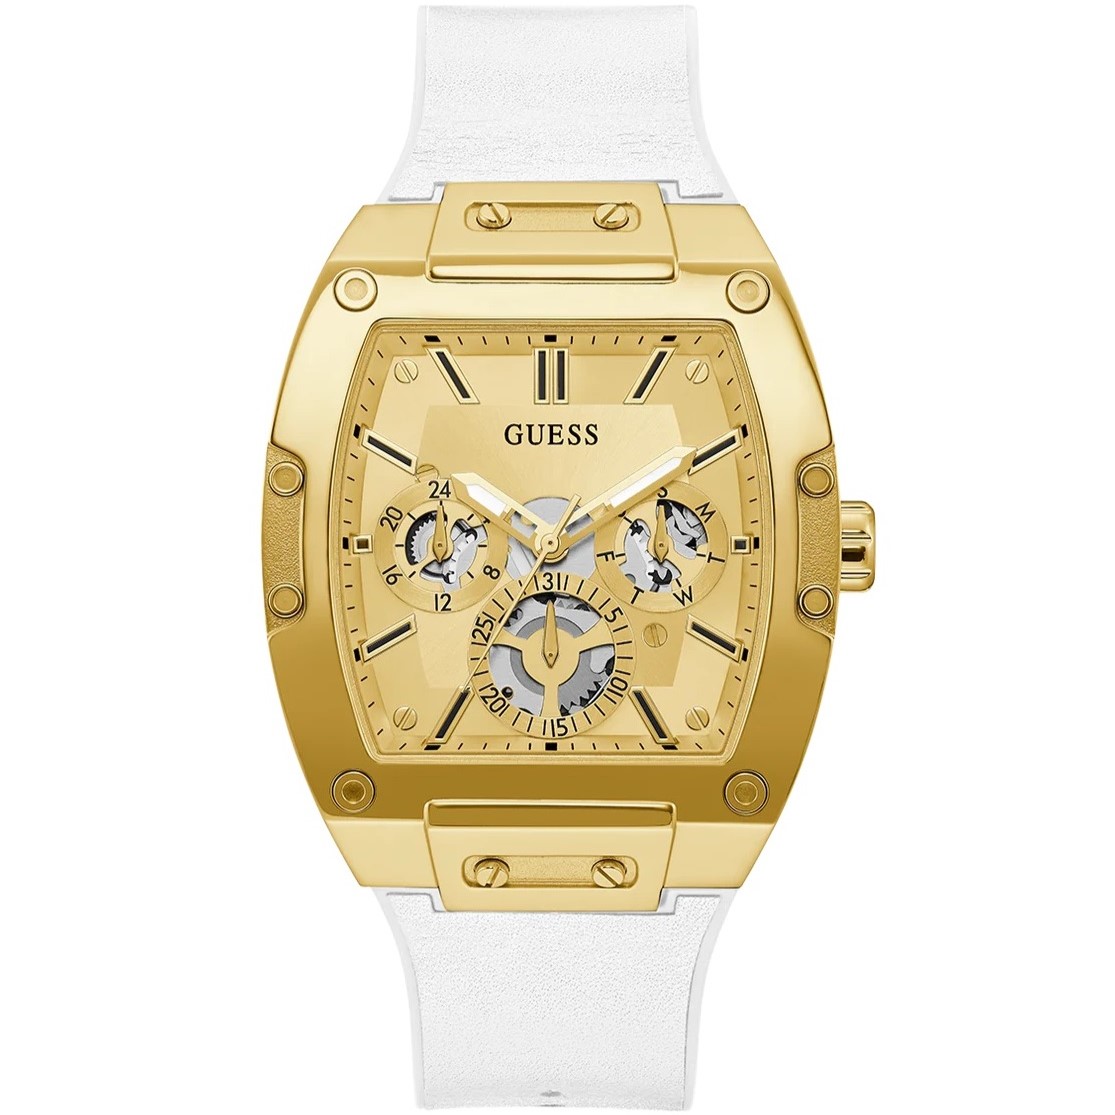 ĐỒNG HỒ GUESS WHITE GOLD TONE MULTI-FUNCTION WATCH GW0202G6 2